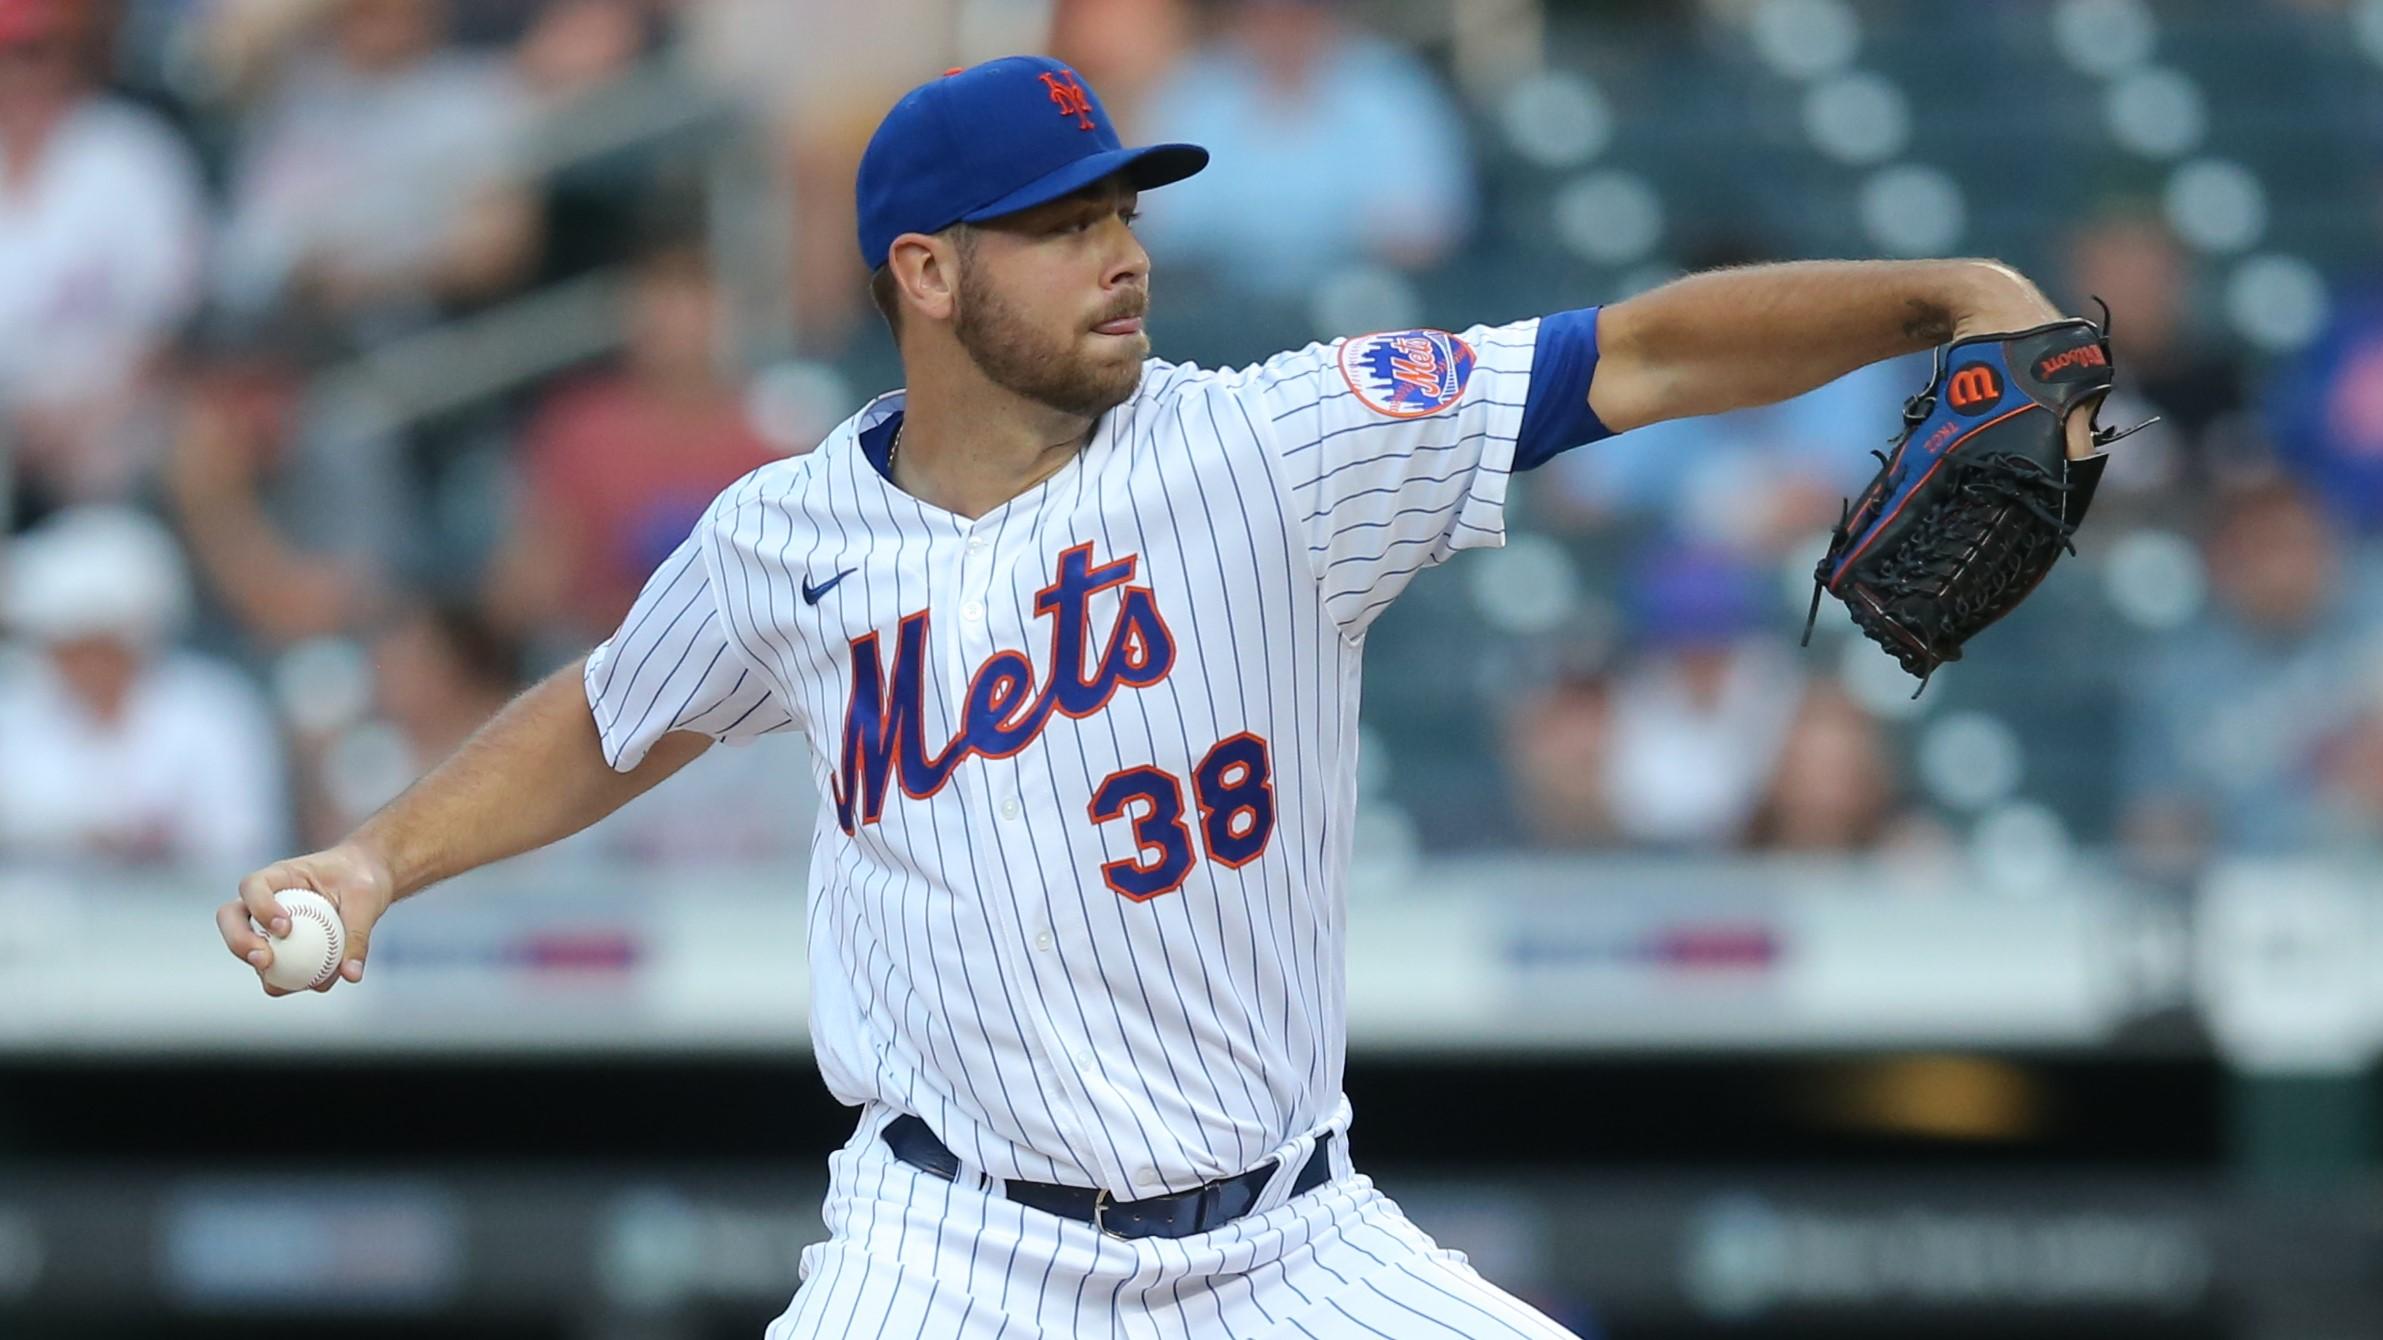 New York Mets starting pitcher Tylor Megill (38) pitches against the Milwaukee Brewers during the first inning at Citi Field. / Brad Penner-USA TODAY Sports